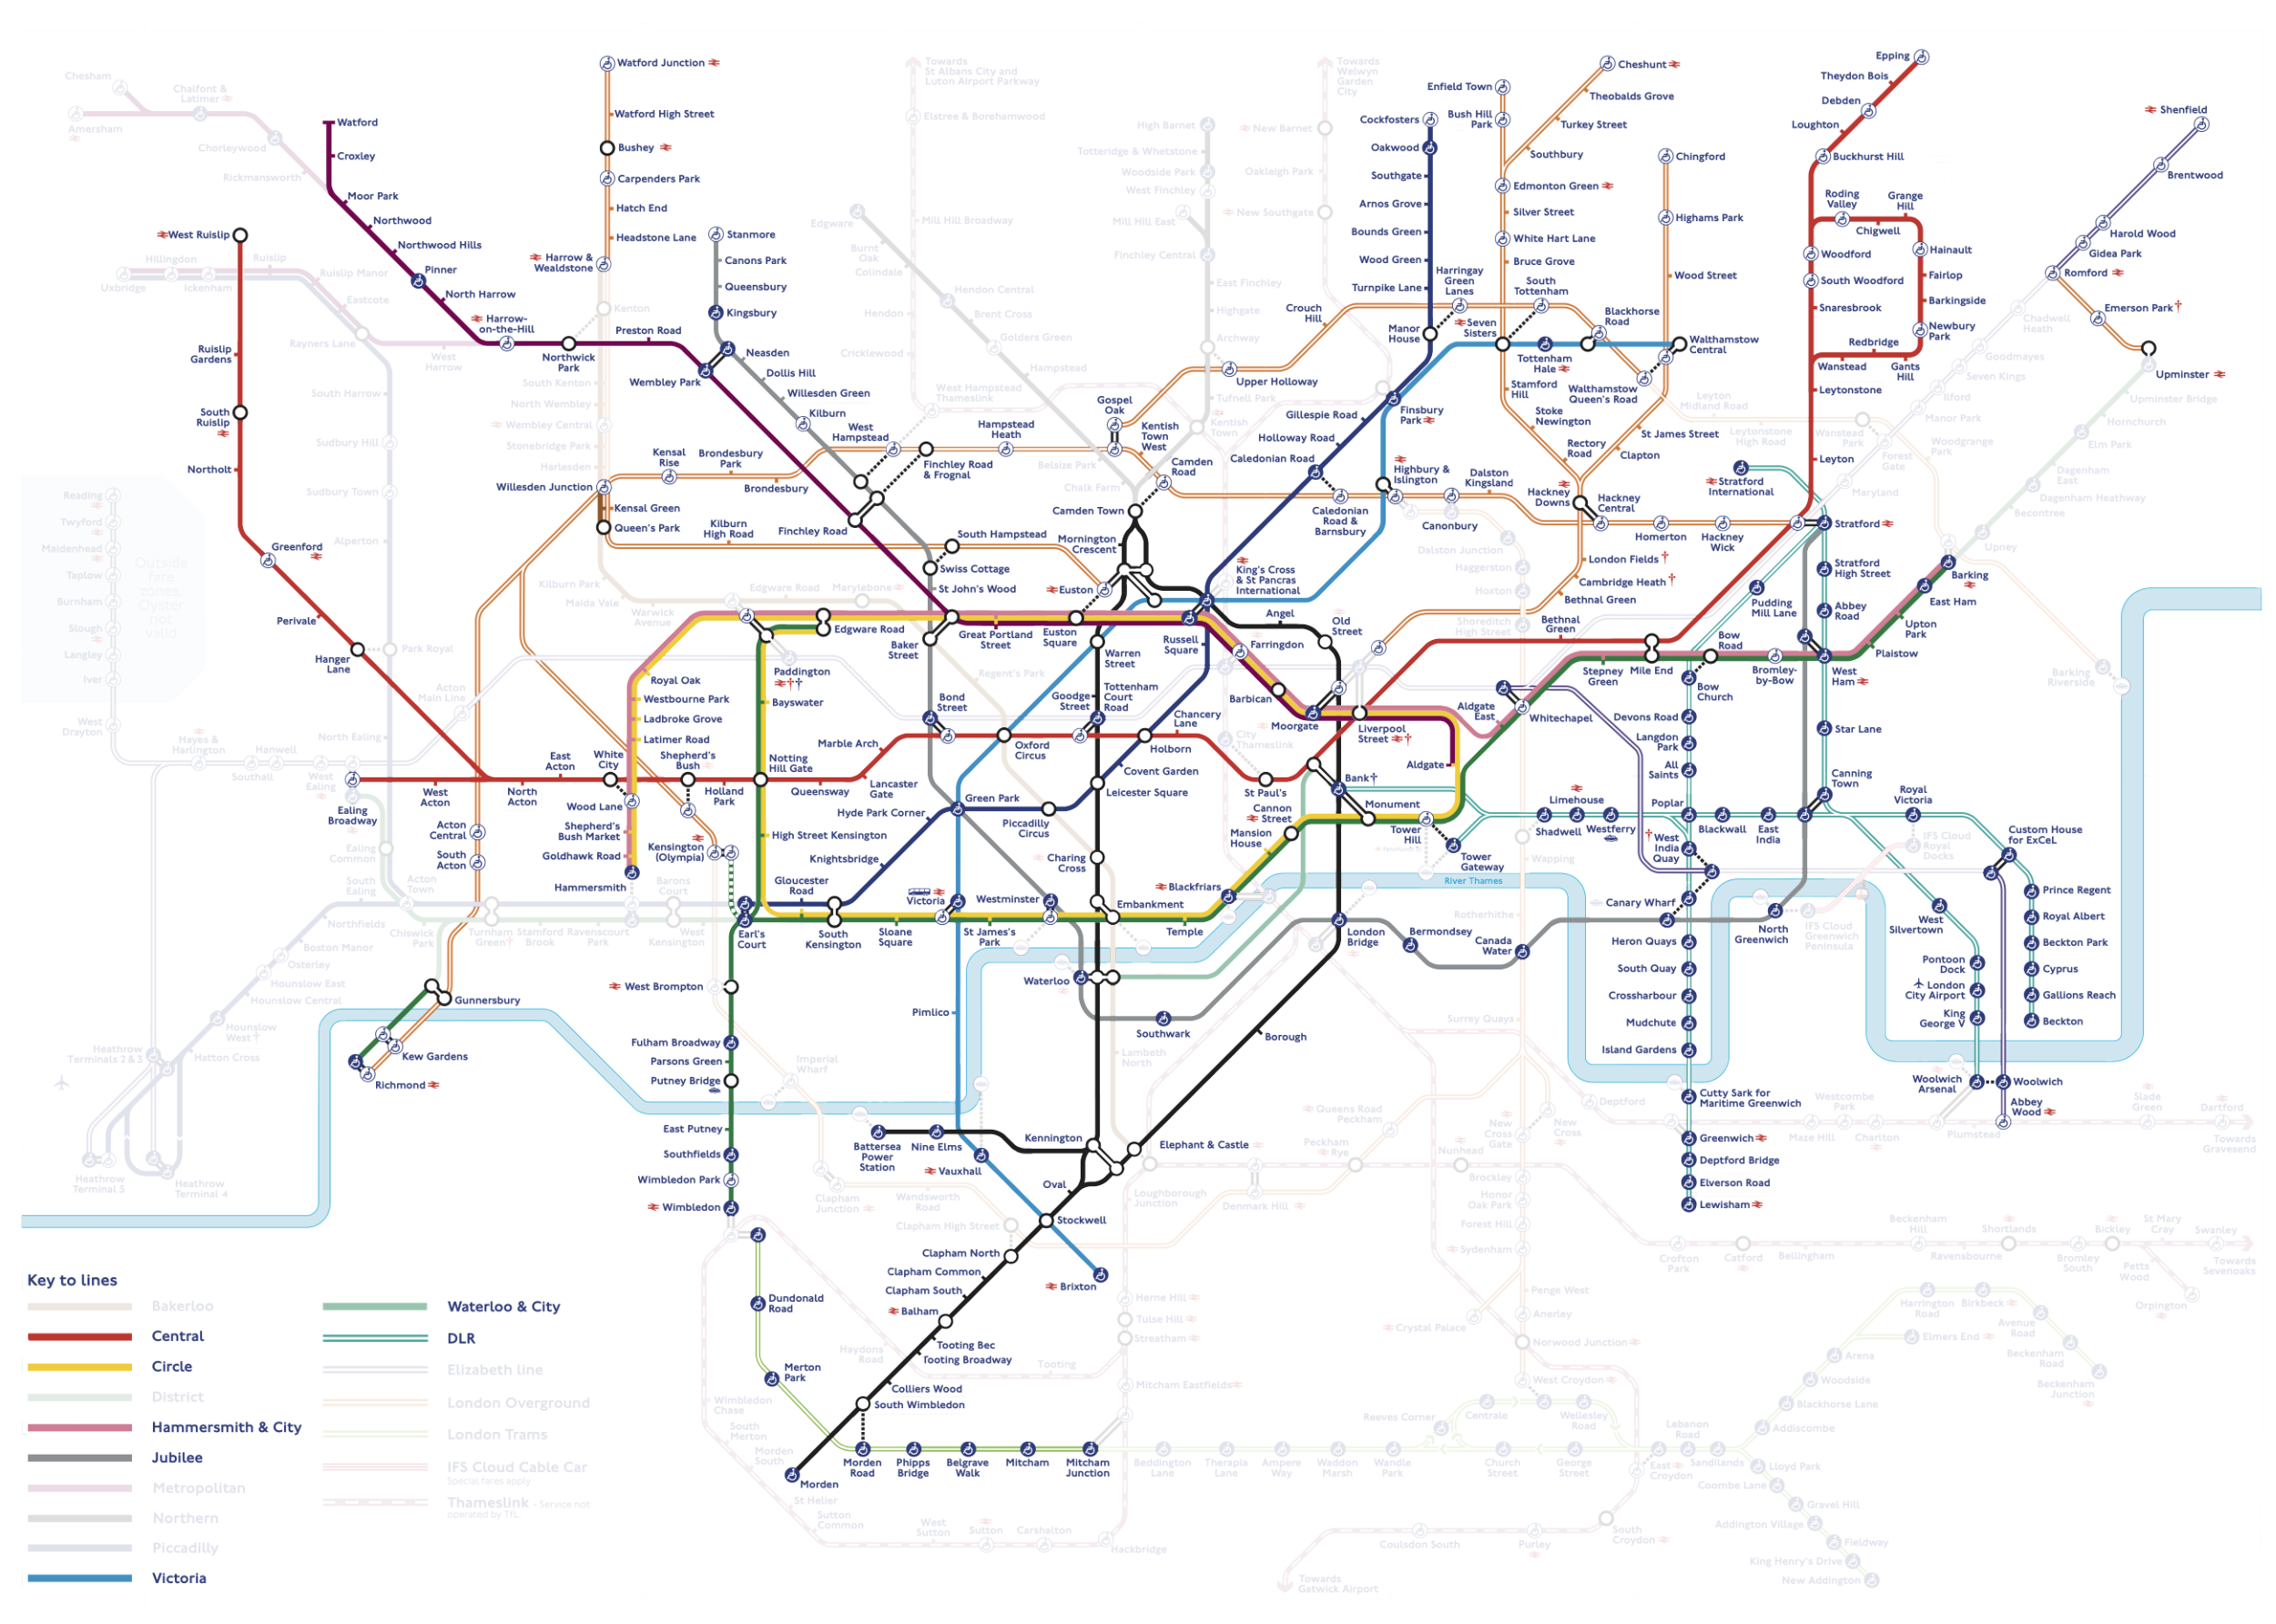 All the parts of the TfL map that I've walked so far. It's really filling out!